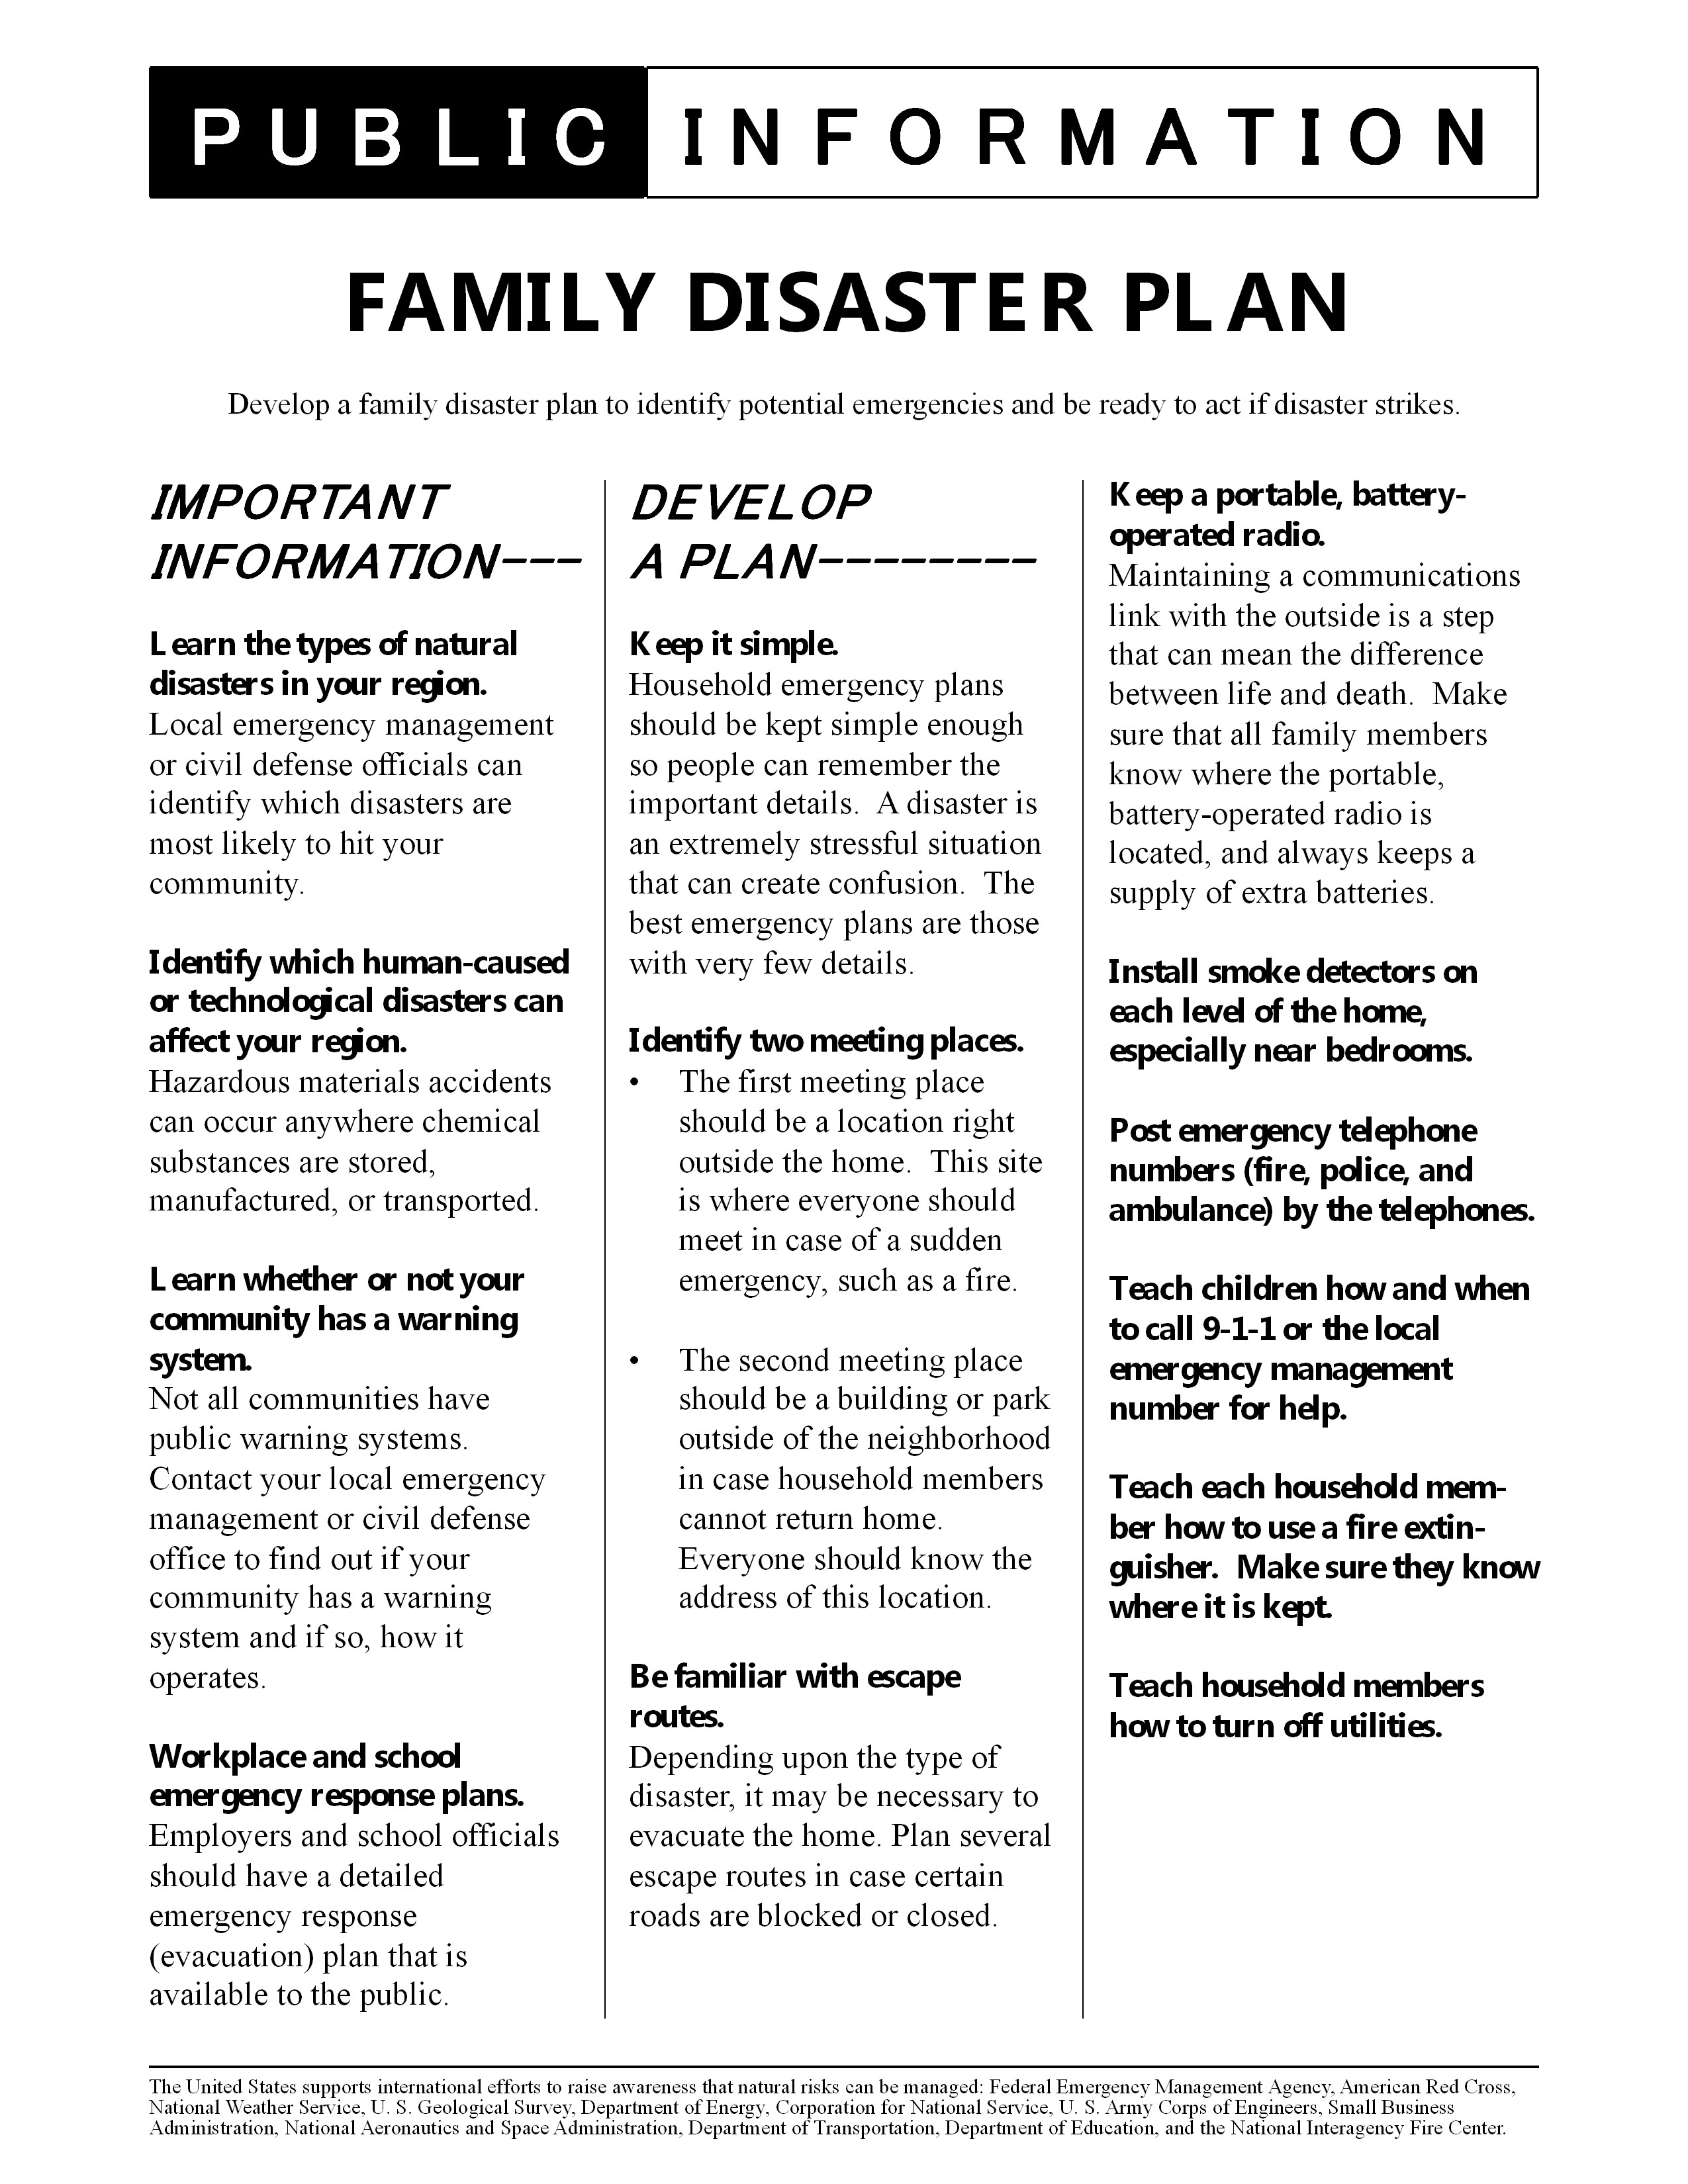 Learn the types of natural disasters in your region. Local Emergency management or civil denense officials can identify which disasters are most liekly to hit your community. Identify which human-caused […]